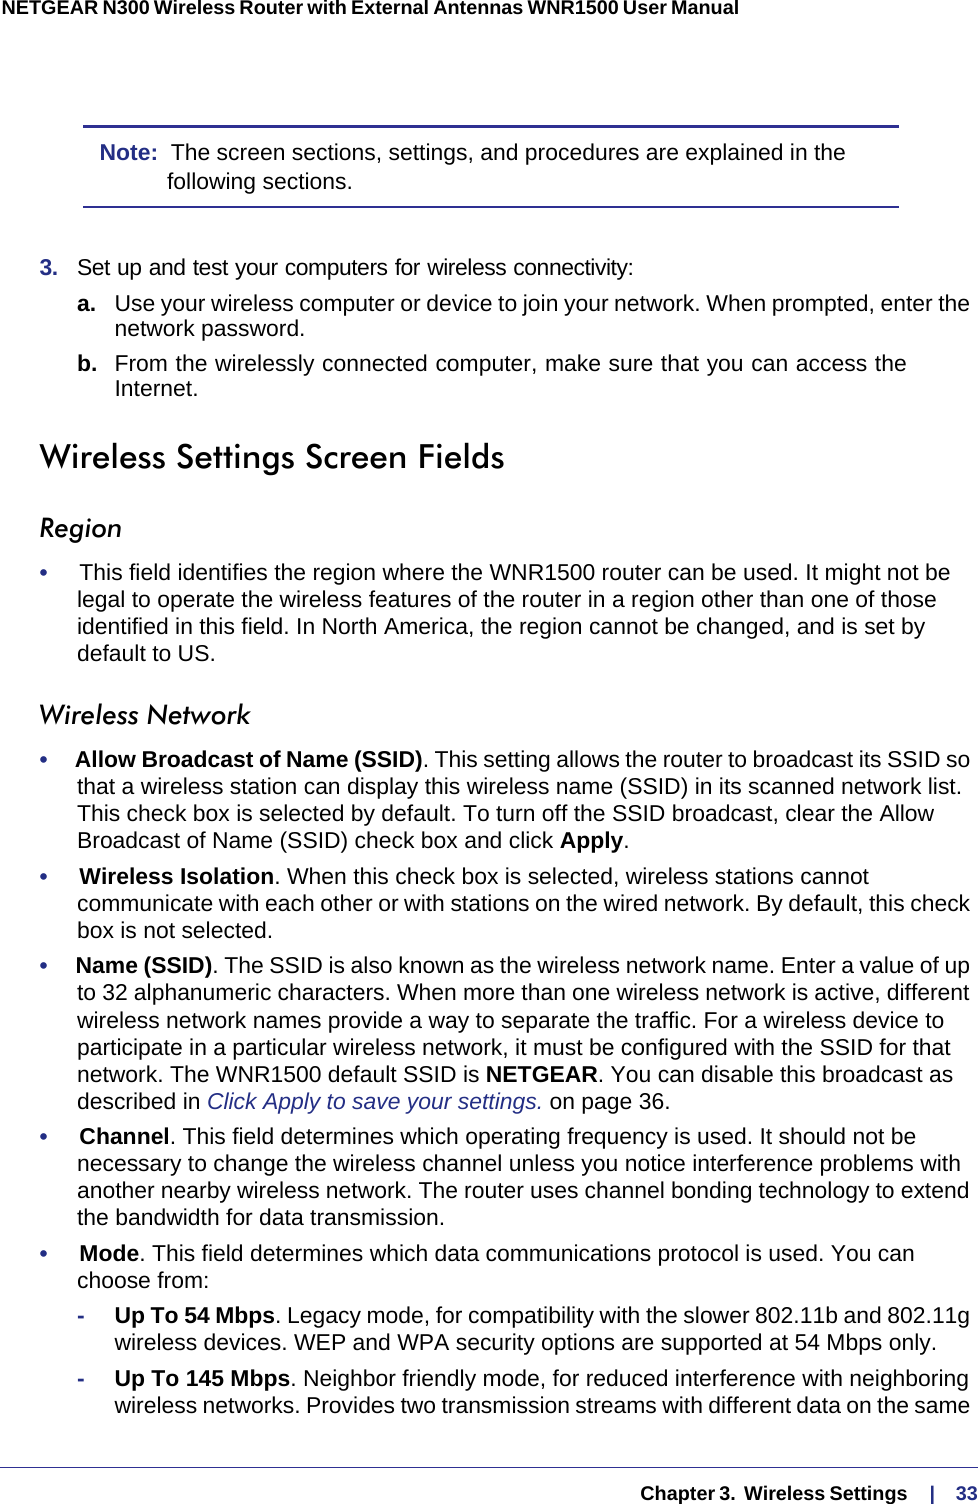   Chapter 3.  Wireless Settings     |    33NETGEAR N300 Wireless Router with External Antennas WNR1500 User Manual Note:  The screen sections, settings, and procedures are explained in the following sections.3.  Set up and test your computers for wireless connectivity:a. Use your wireless computer or device to join your network. When prompted, enter the network password.b.  From the wirelessly connected computer, make sure that you can access the Internet.Wireless Settings Screen FieldsRegion•     This field identifies the region where the WNR1500 router can be used. It might not be legal to operate the wireless features of the router in a region other than one of those identified in this field. In North America, the region cannot be changed, and is set by default to US.Wireless Network•     Allow Broadcast of Name (SSID). This setting allows the router to broadcast its SSID so that a wireless station can display this wireless name (SSID) in its scanned network list. This check box is selected by default. To turn off the SSID broadcast, clear the Allow Broadcast of Name (SSID) check box and click Apply.•     Wireless Isolation. When this check box is selected, wireless stations cannot communicate with each other or with stations on the wired network. By default, this check box is not selected.•     Name (SSID). The SSID is also known as the wireless network name. Enter a value of up to 32 alphanumeric characters. When more than one wireless network is active, different wireless network names provide a way to separate the traffic. For a wireless device to participate in a particular wireless network, it must be configured with the SSID for that network. The WNR1500 default SSID is NETGEAR. You can disable this broadcast as described in Click Apply to save your settings. on page  36. •     Channel. This field determines which operating frequency is used. It should not be necessary to change the wireless channel unless you notice interference problems with another nearby wireless network. The router uses channel bonding technology to extend the bandwidth for data transmission. •     Mode. This field determines which data communications protocol is used. You can choose from:-Up To 54 Mbps. Legacy mode, for compatibility with the slower 802.11b and 802.11g wireless devices. WEP and WPA security options are supported at 54 Mbps only.-Up To 145 Mbps. Neighbor friendly mode, for reduced interference with neighboring wireless networks. Provides two transmission streams with different data on the same 